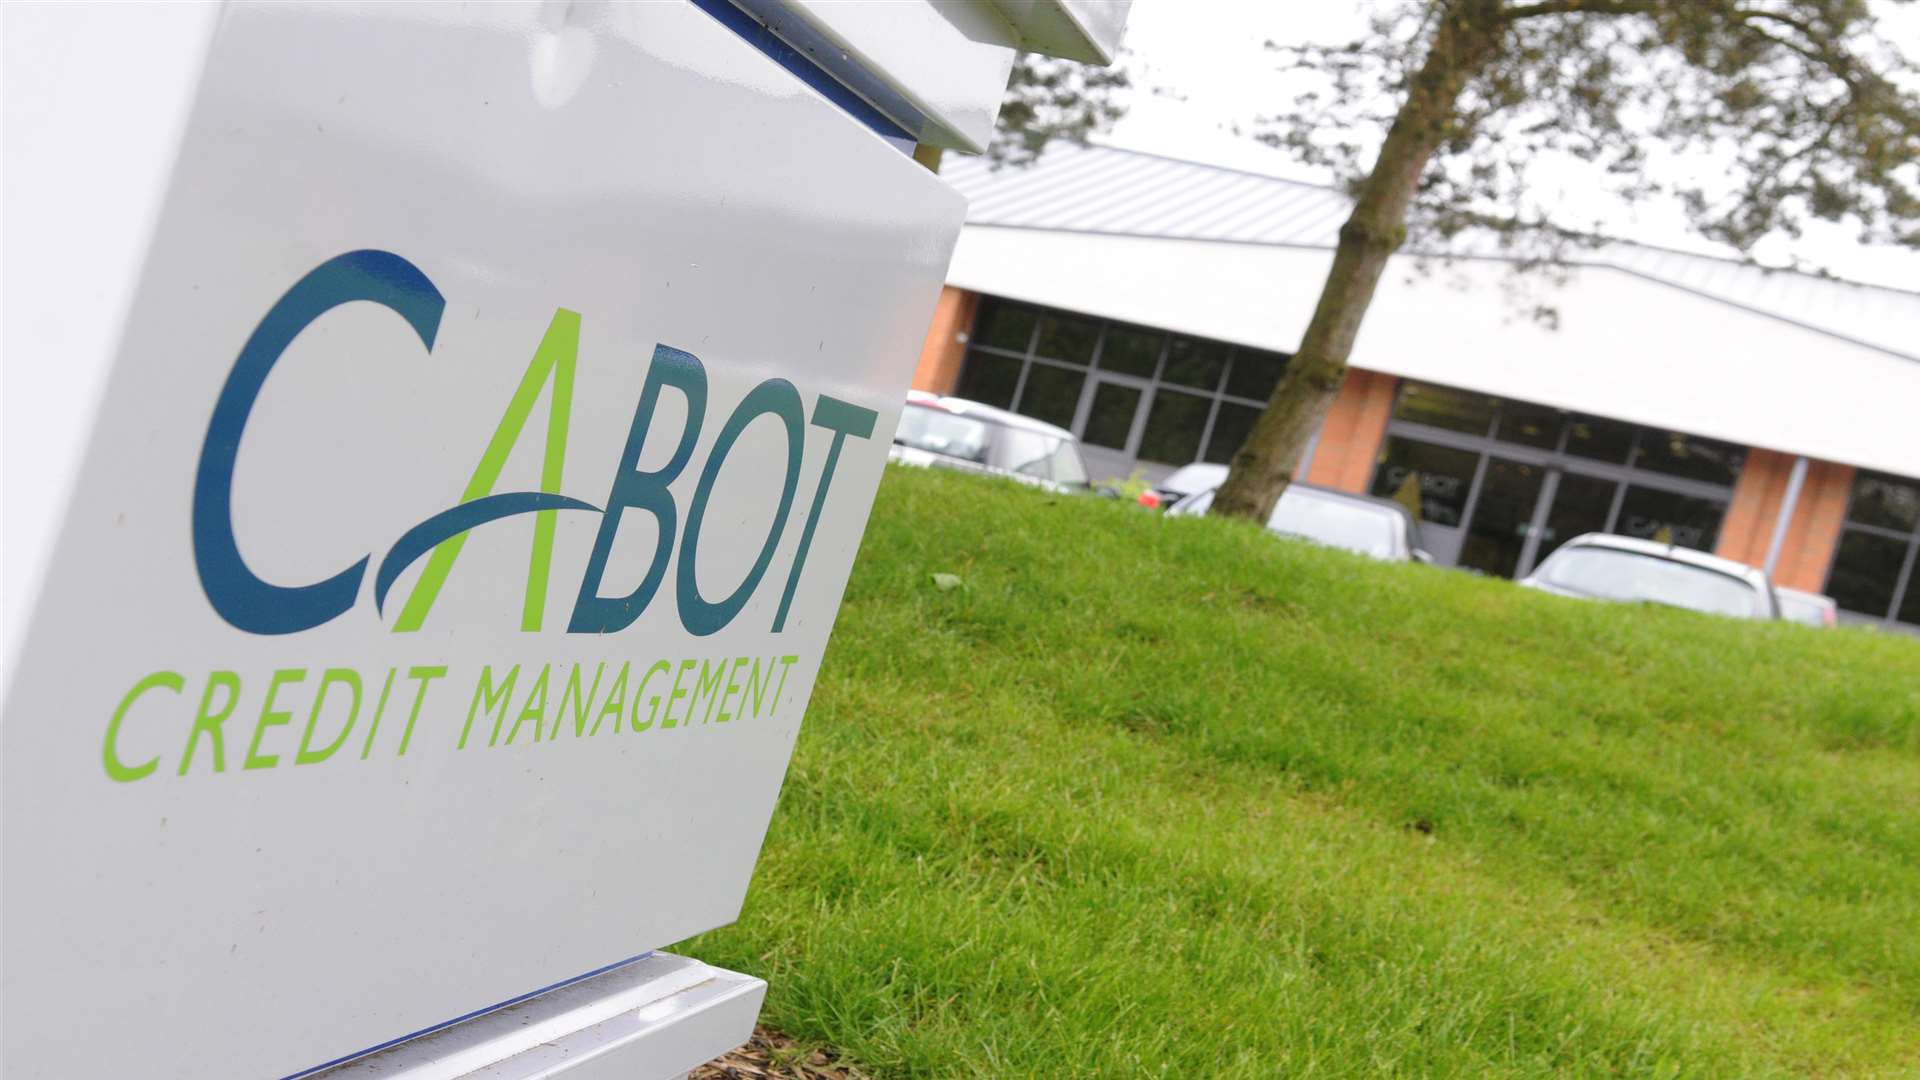 Cabot Credit Management in Kings Hill